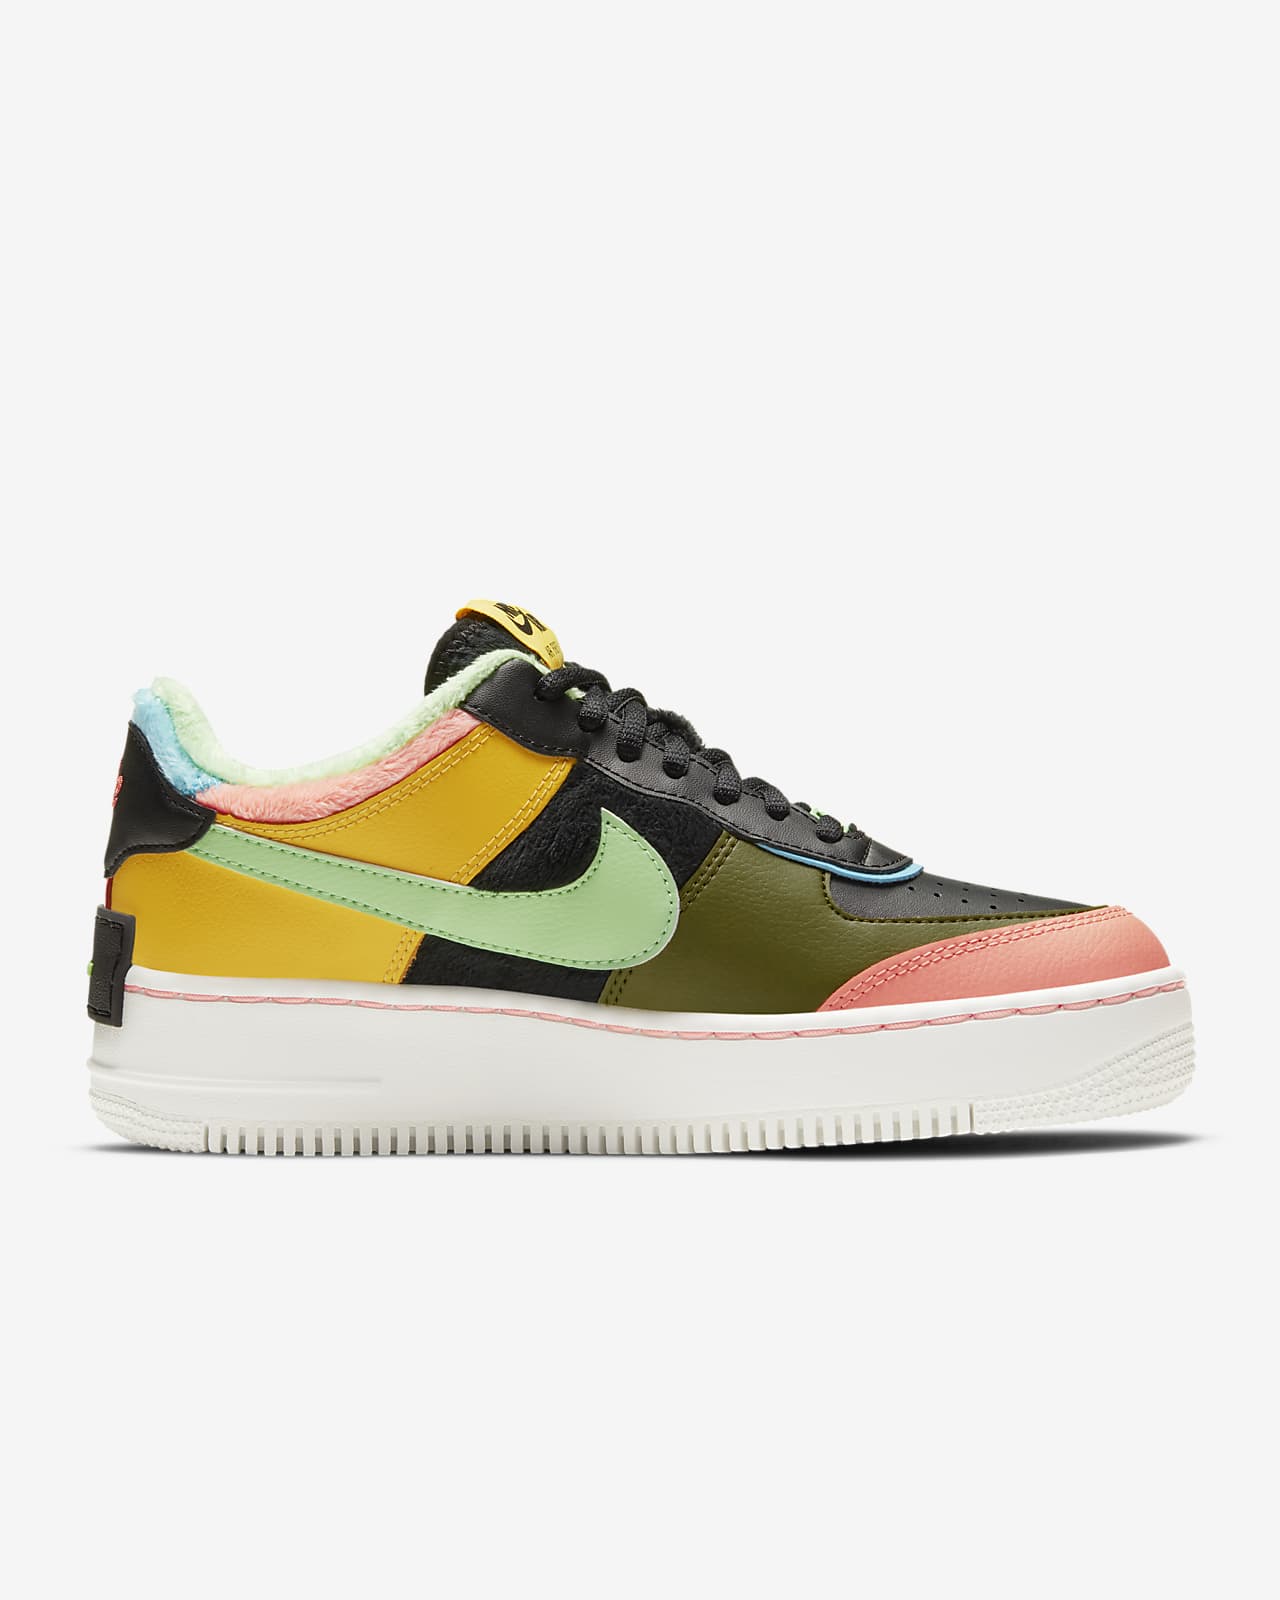 Chaussure Nike Air Force 1 Shadow SE pour Femme